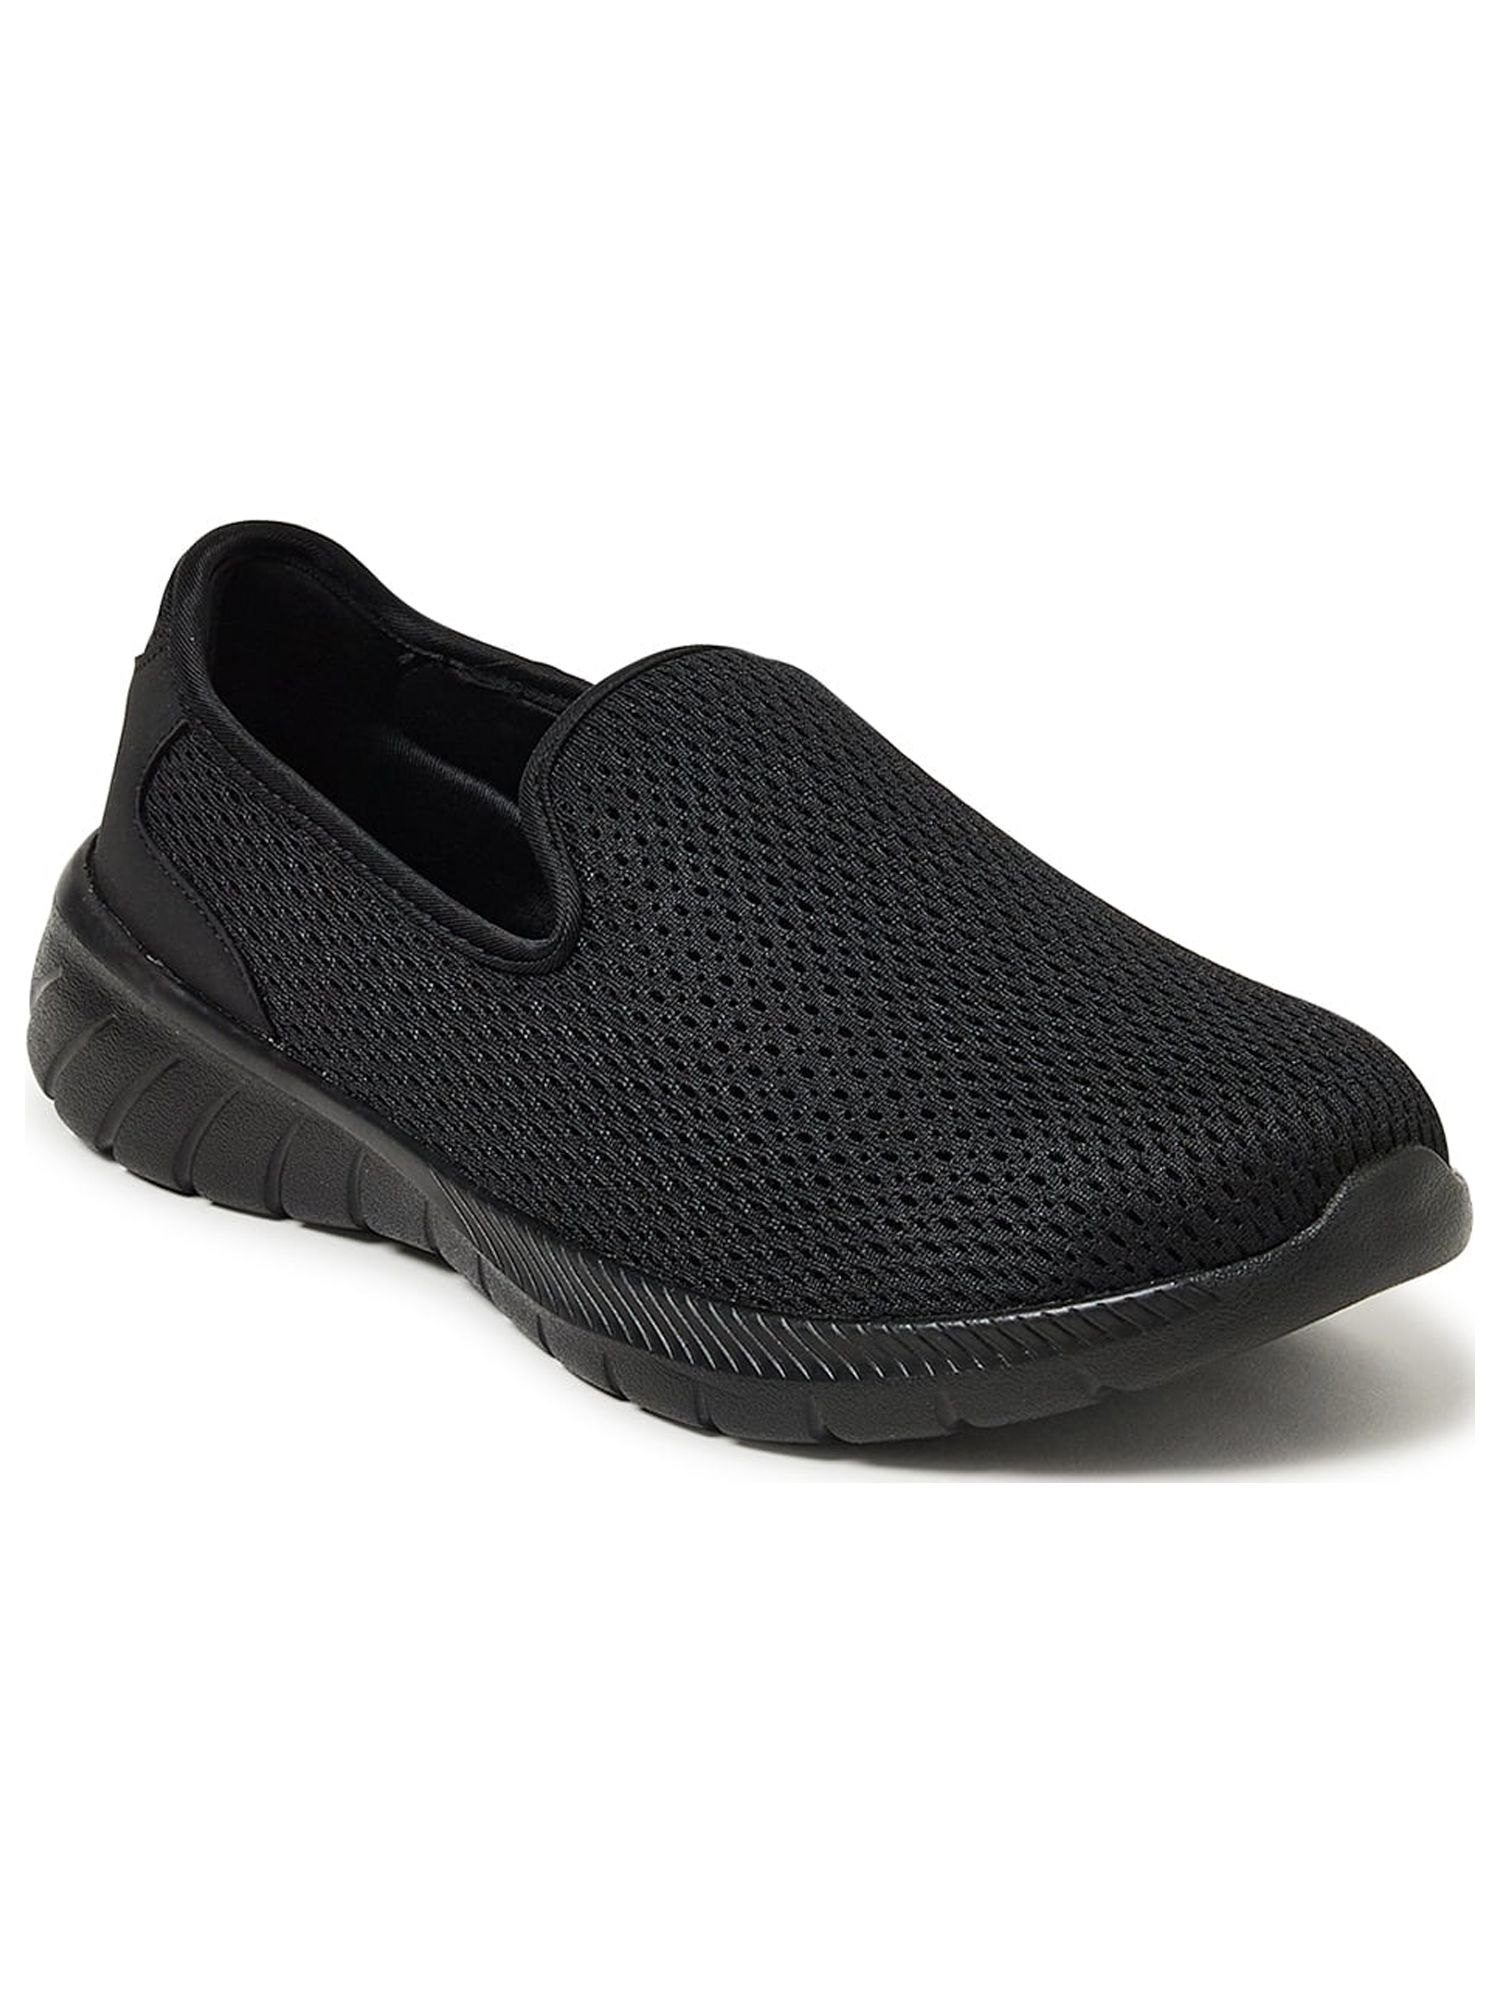 Athletic Works Women's Slip-On Sneakers (Wide Width Available) - image 1 of 6